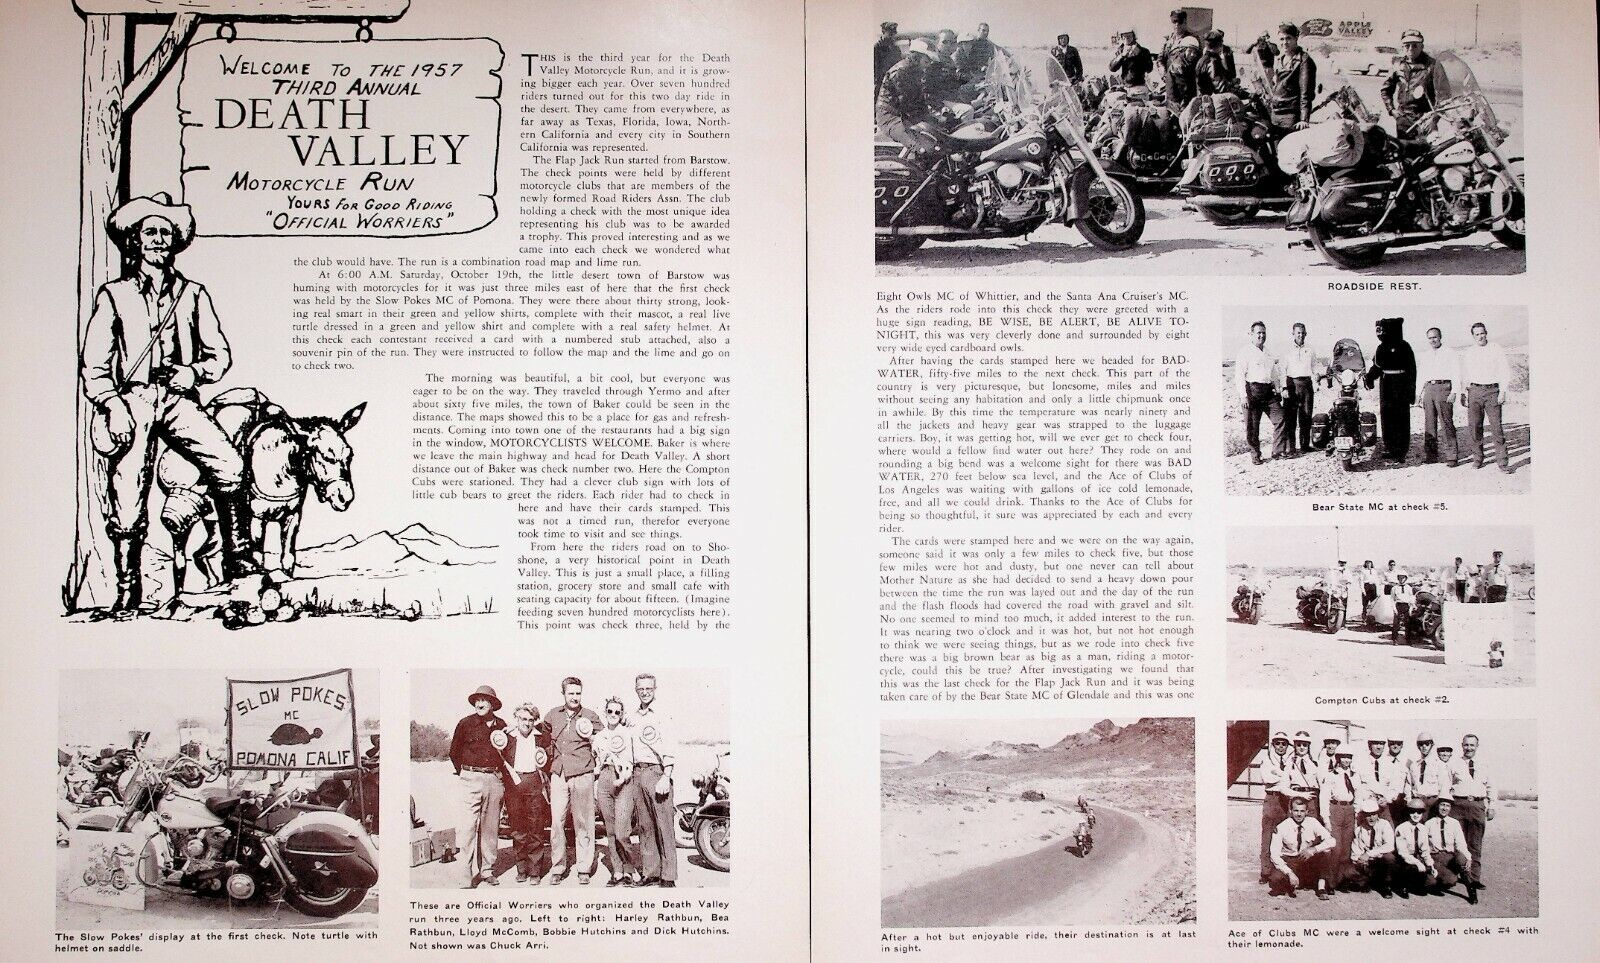 1957 Death Valley Motorcycle Run 3rd Annual - 4-page Vintage Article